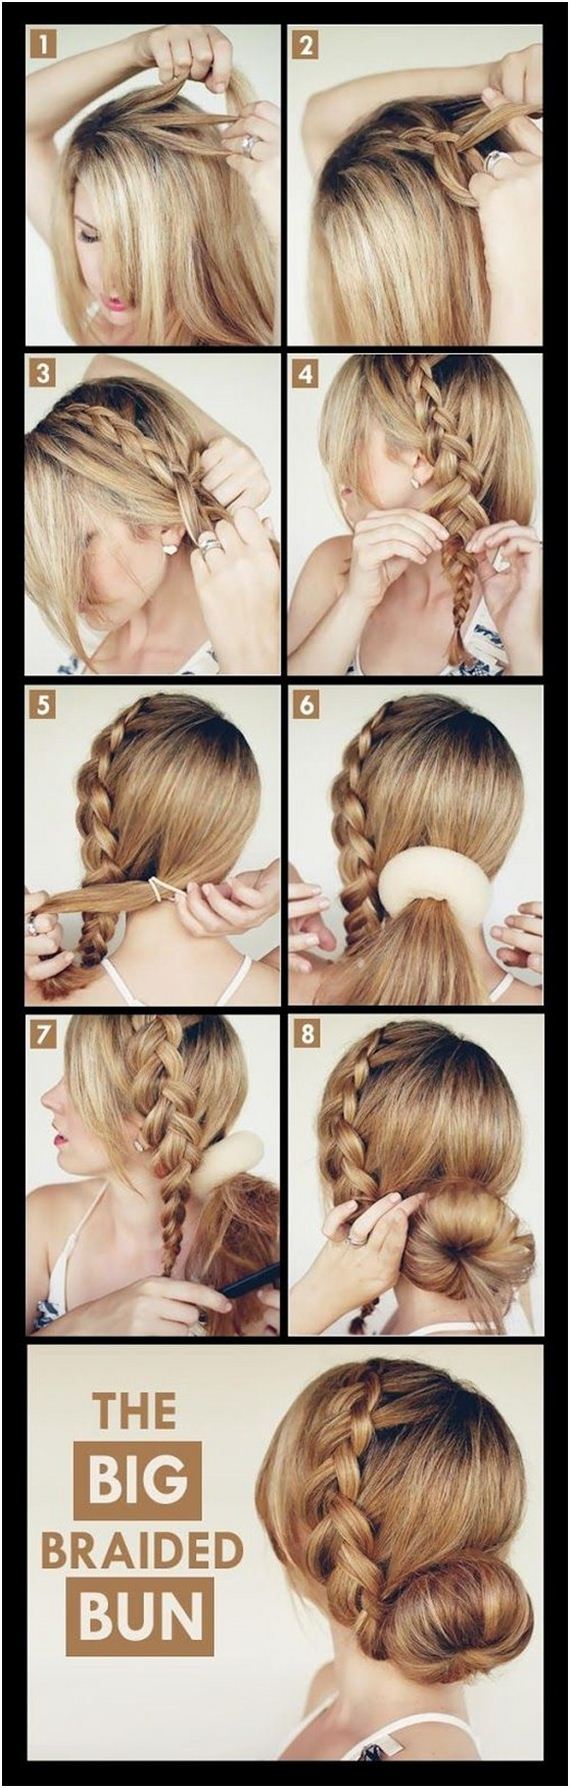 03-Braided-Updo-Hairstyles